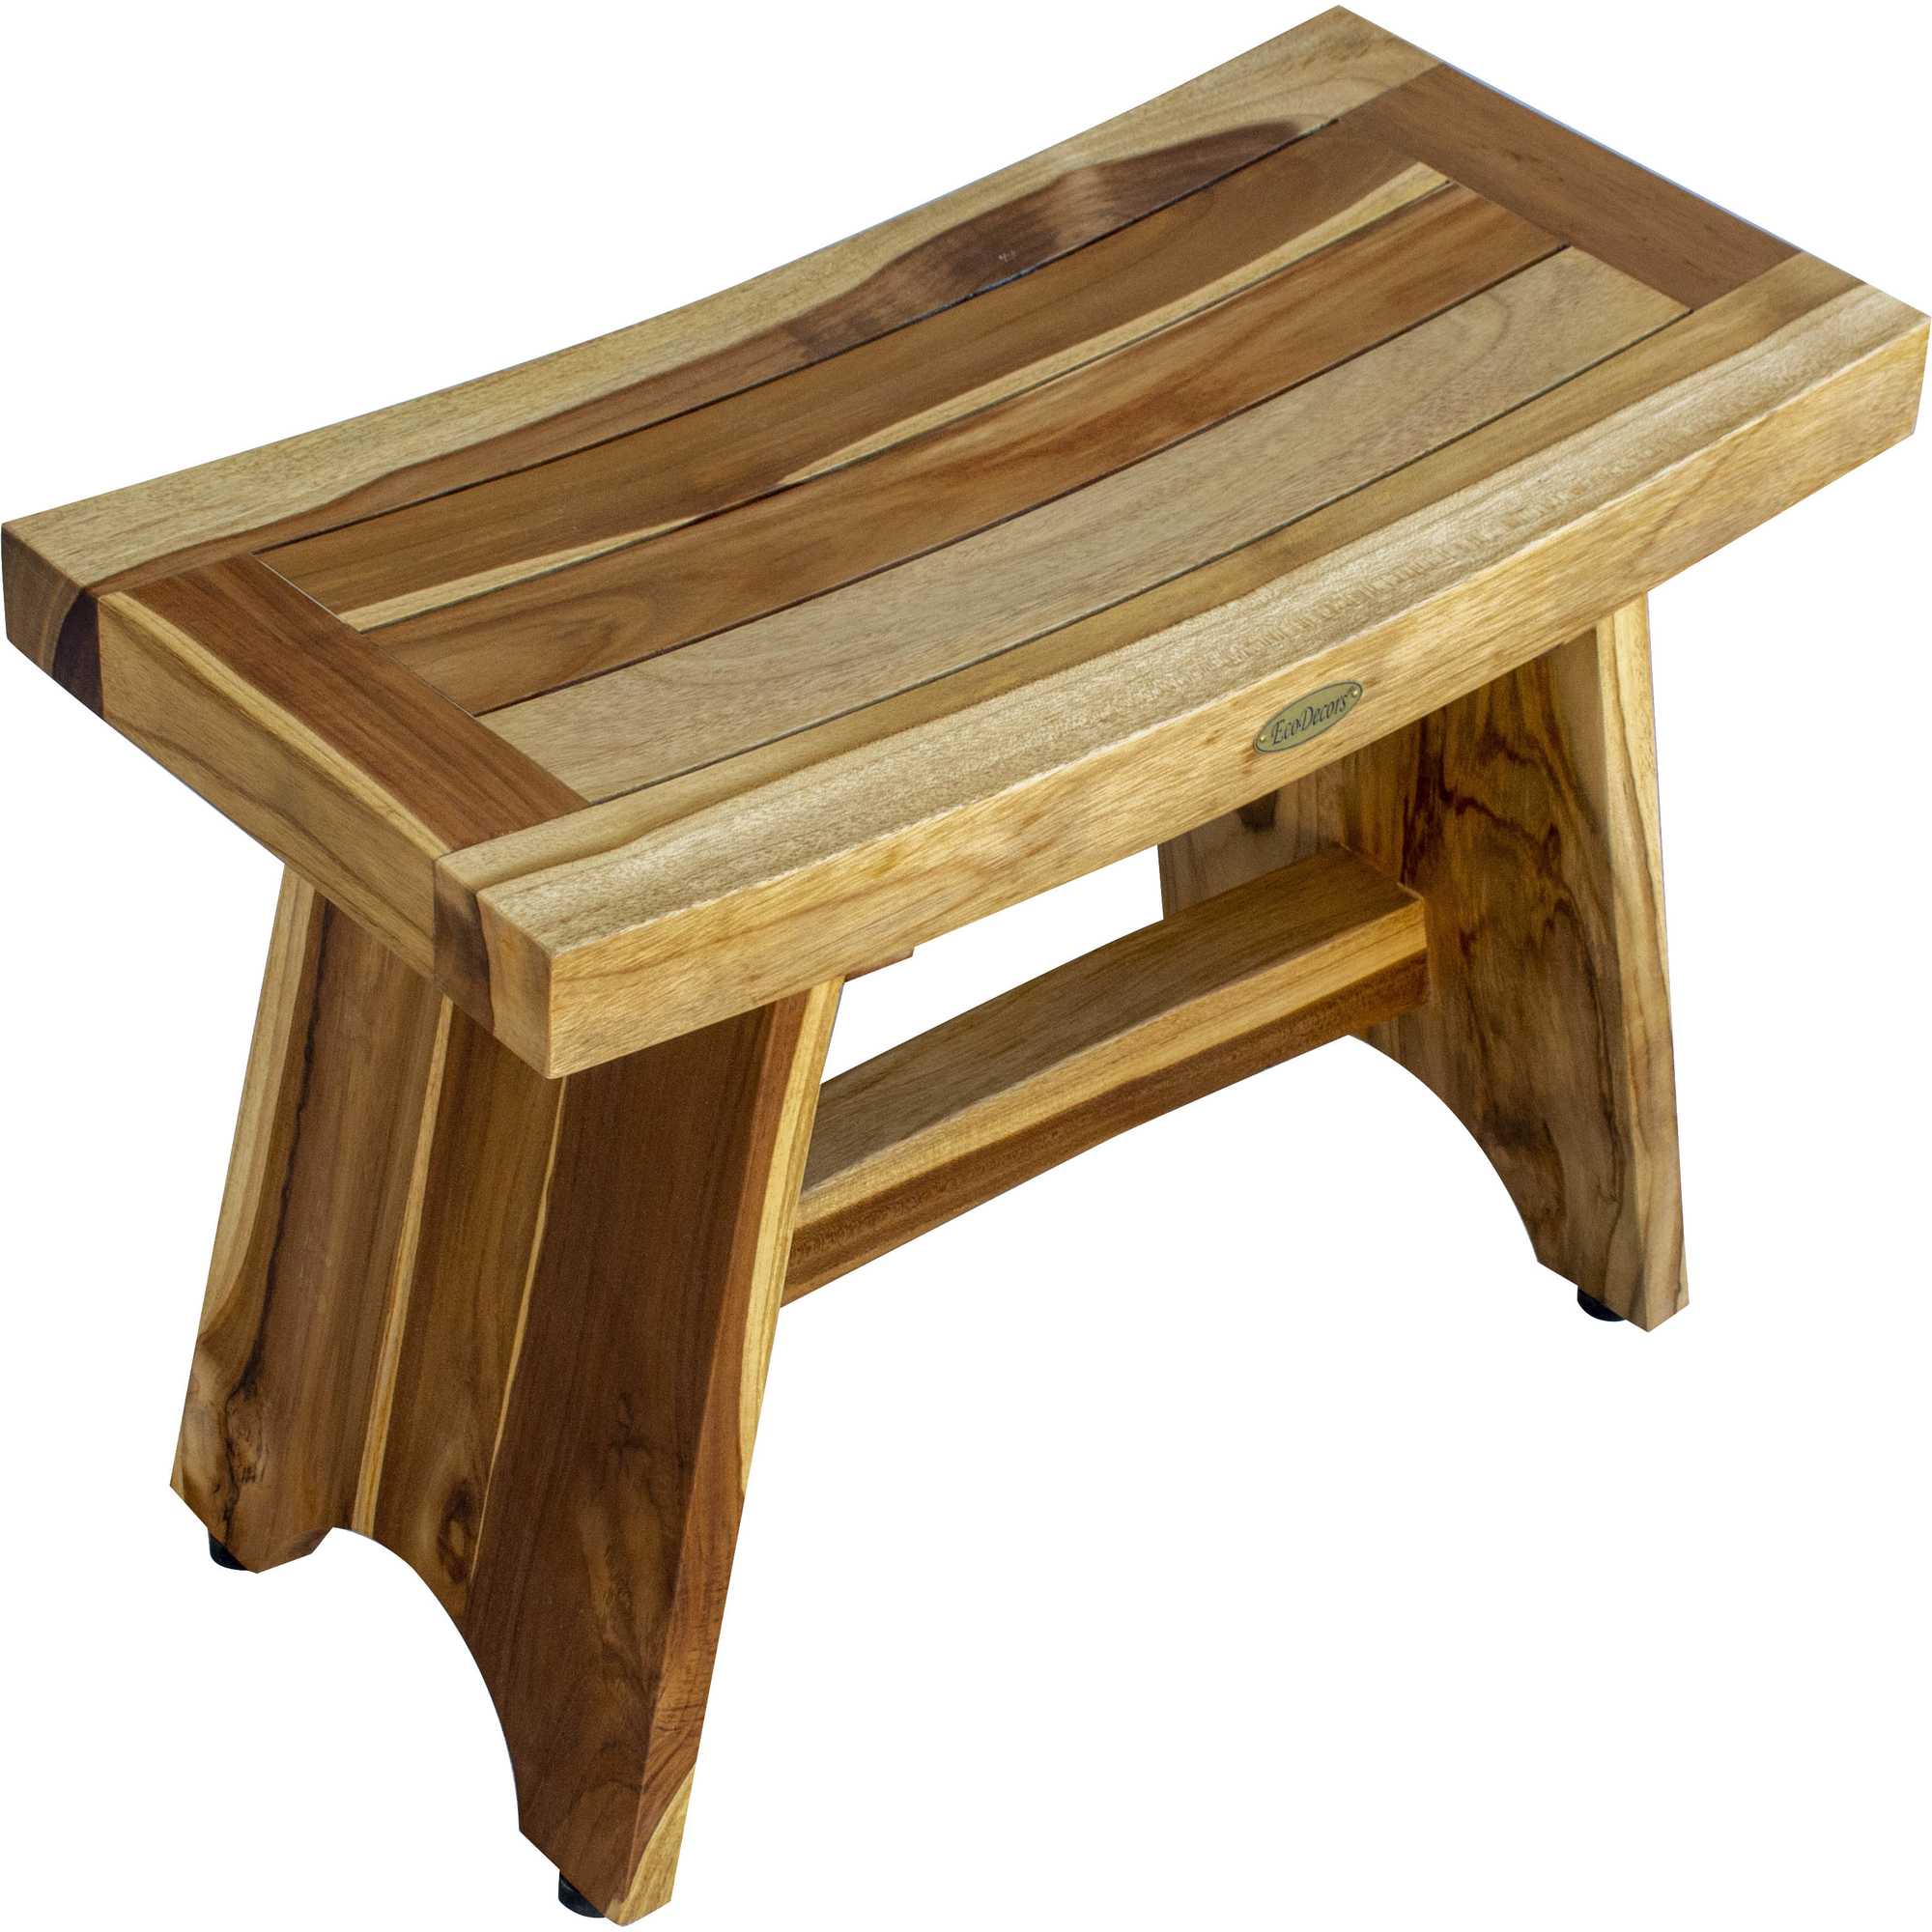 Contemporary Teak Outdoor Bench in Natural Finish